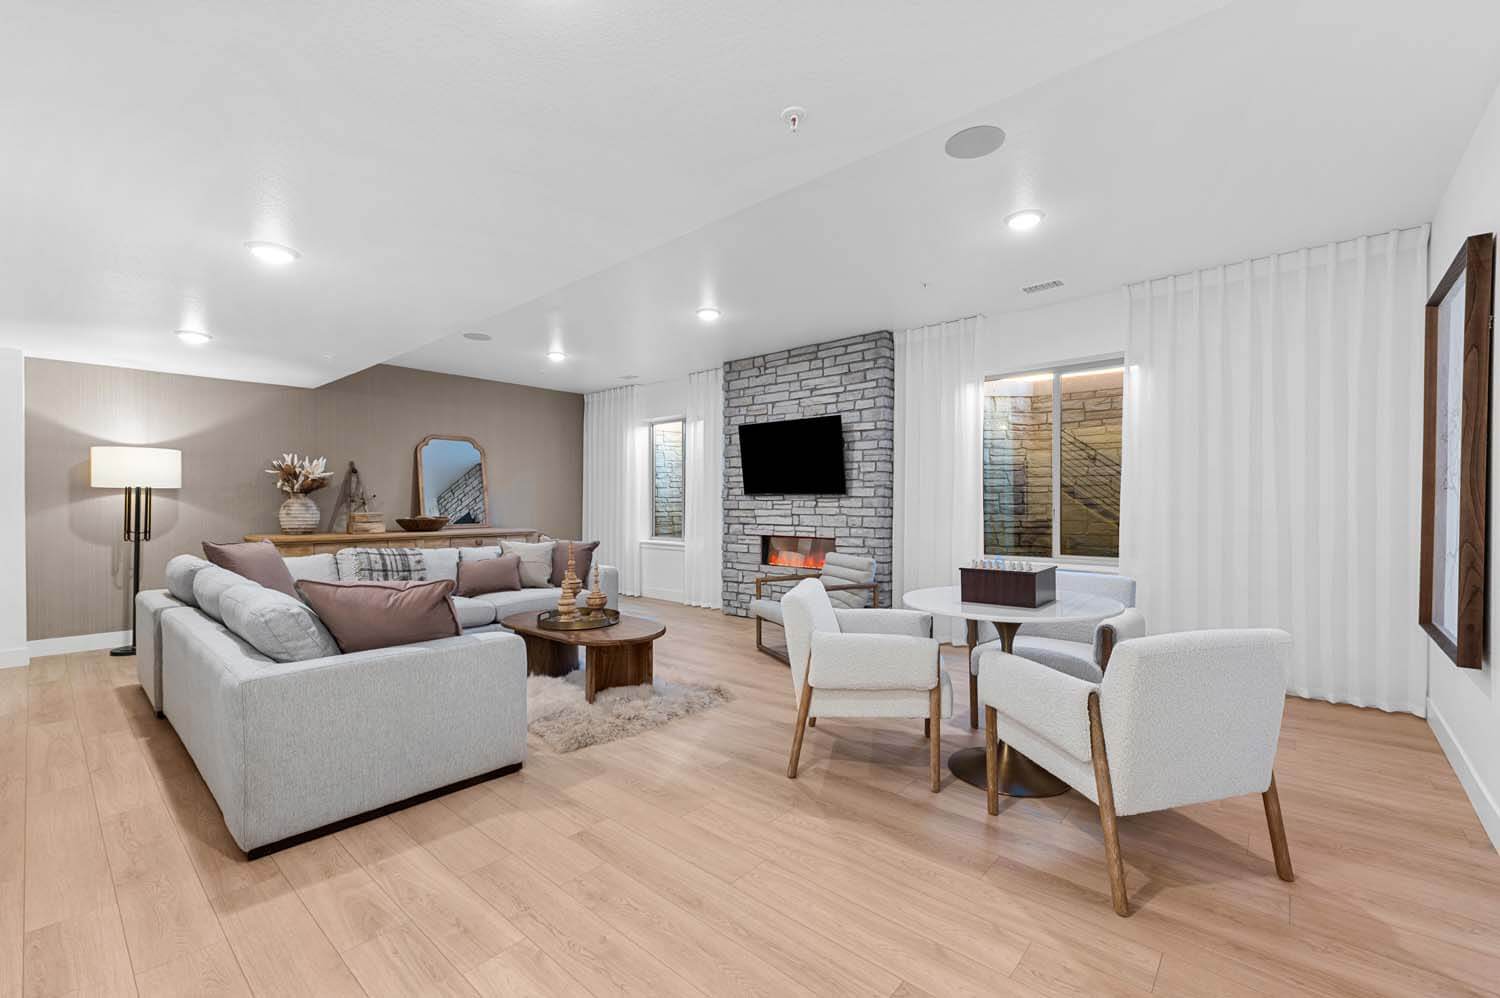 The rec room in the developed basement has a tan wallpapered accent wall, hardwood floors, a gas fireplace with a floor-to-ceiling stone surround and an oversized window on either side.